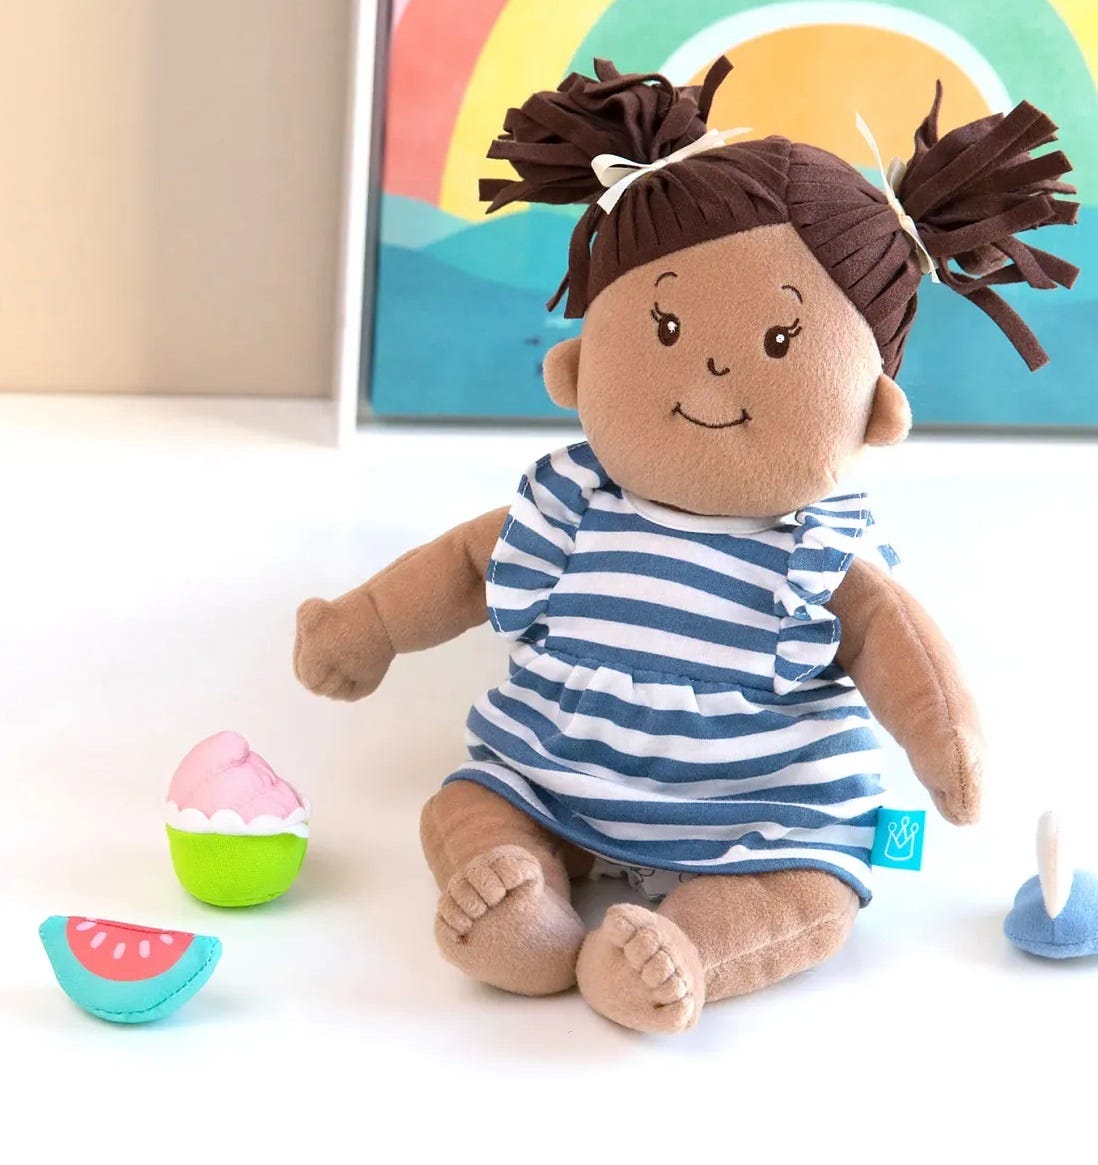 A fabric doll with tan skin and dark brown hair sits in a white and blue striped dress with toy accessories strewn around her.